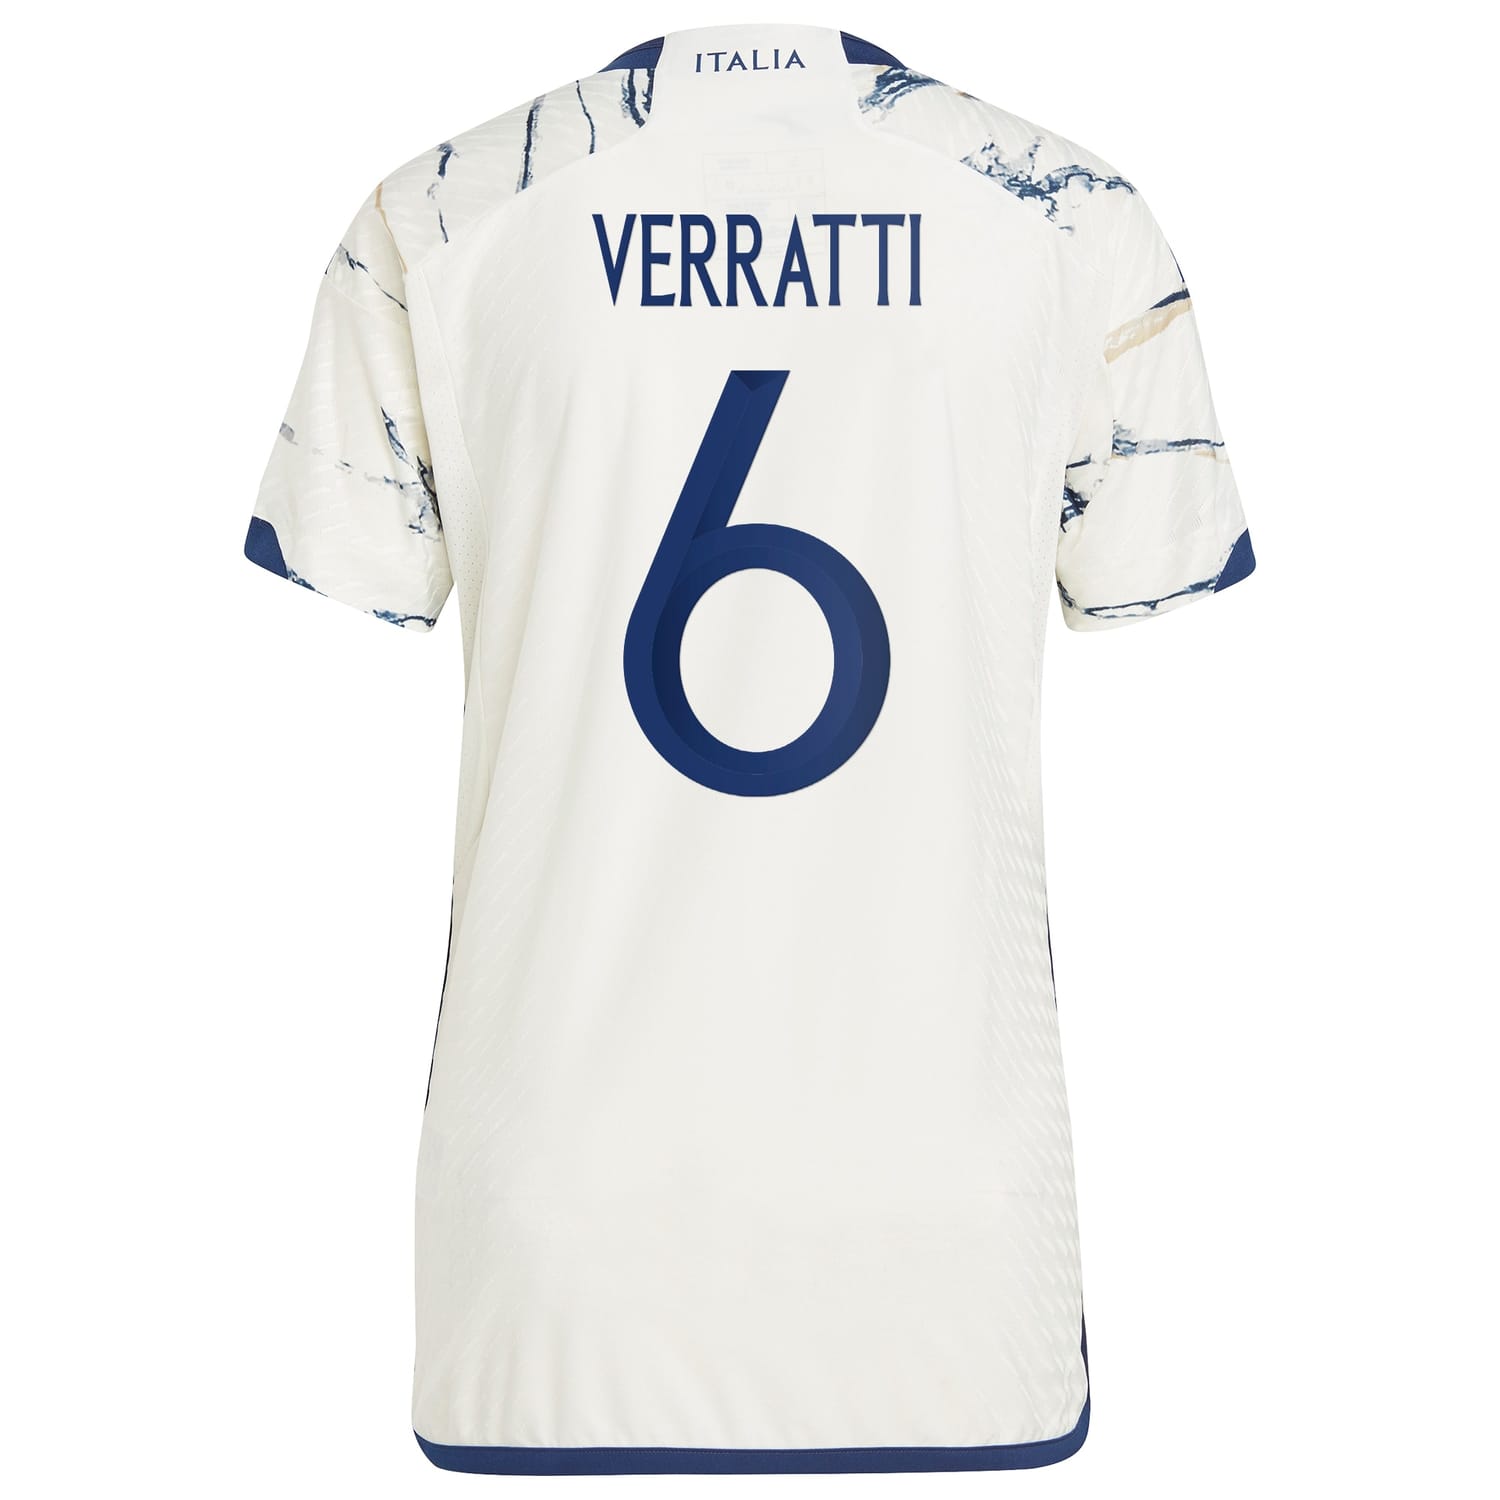 Italy National Team Away Authentic Jersey Shirt White 2023 player Marco Verratti printing for Men